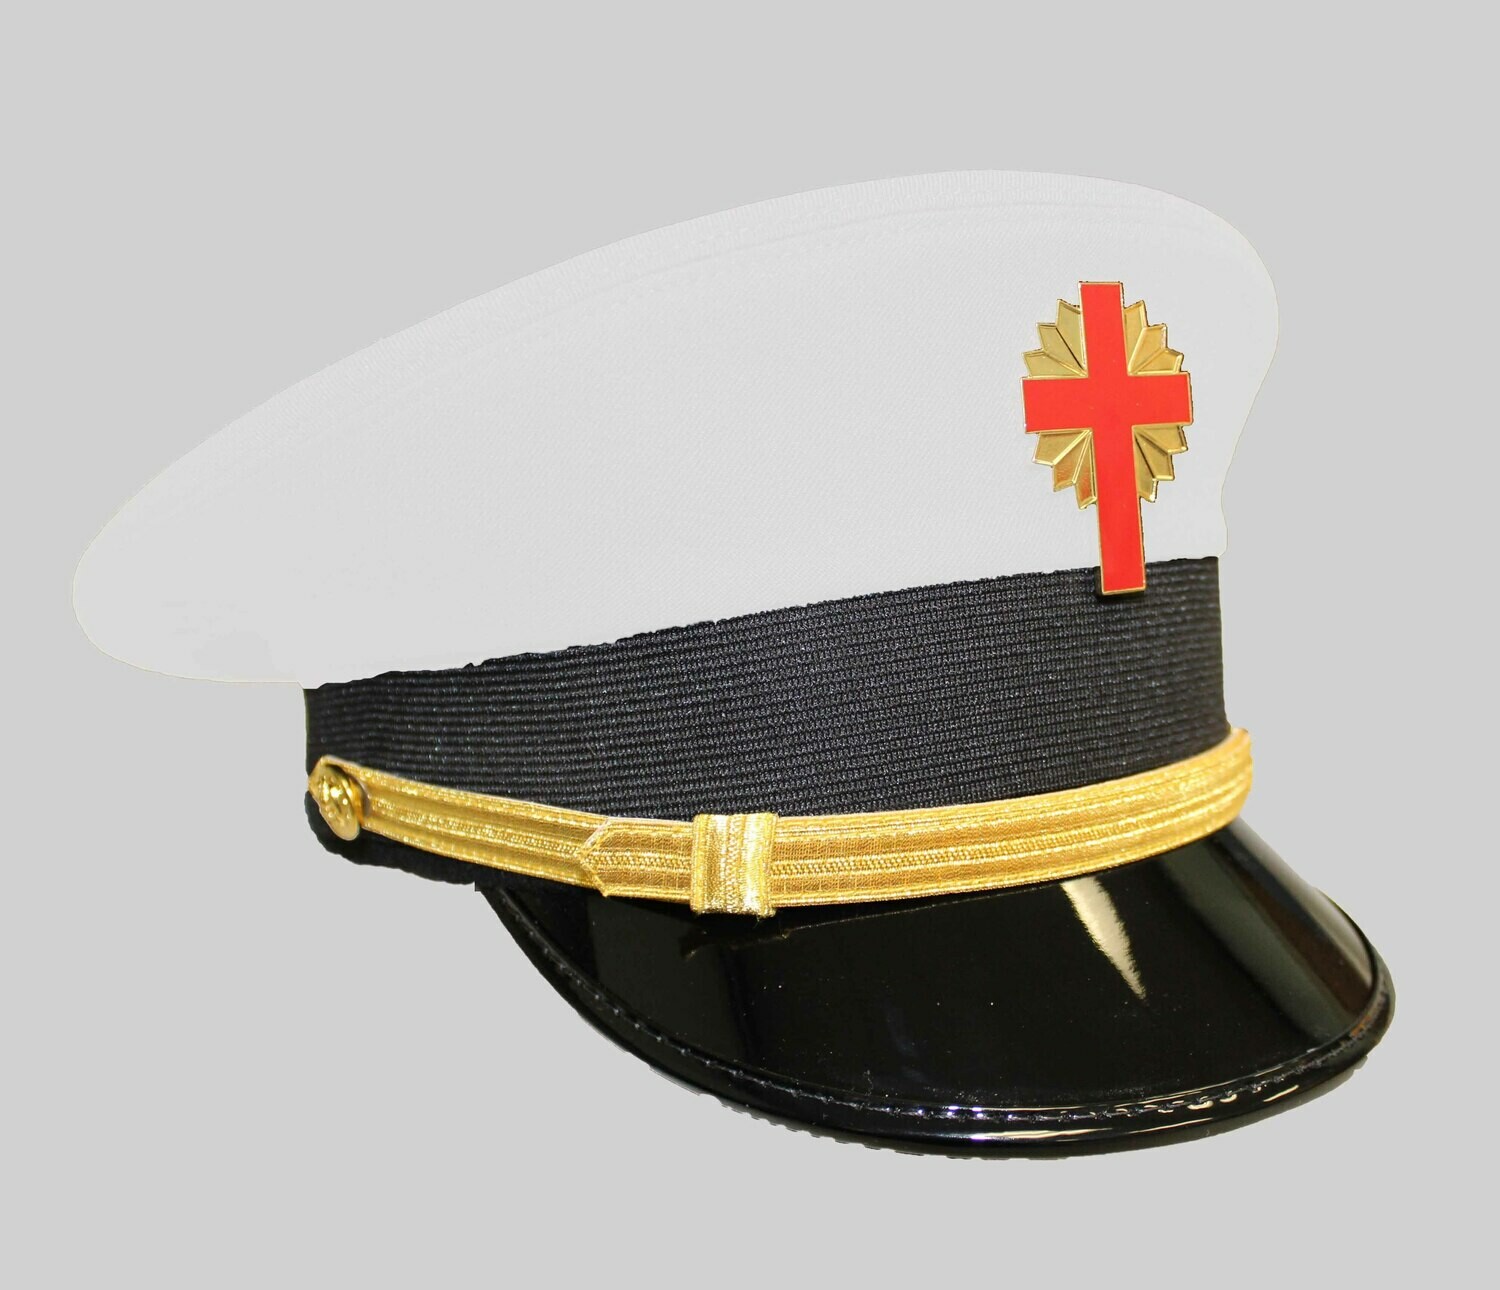 Sir Knight White Battalion Cap (cap badge not included)